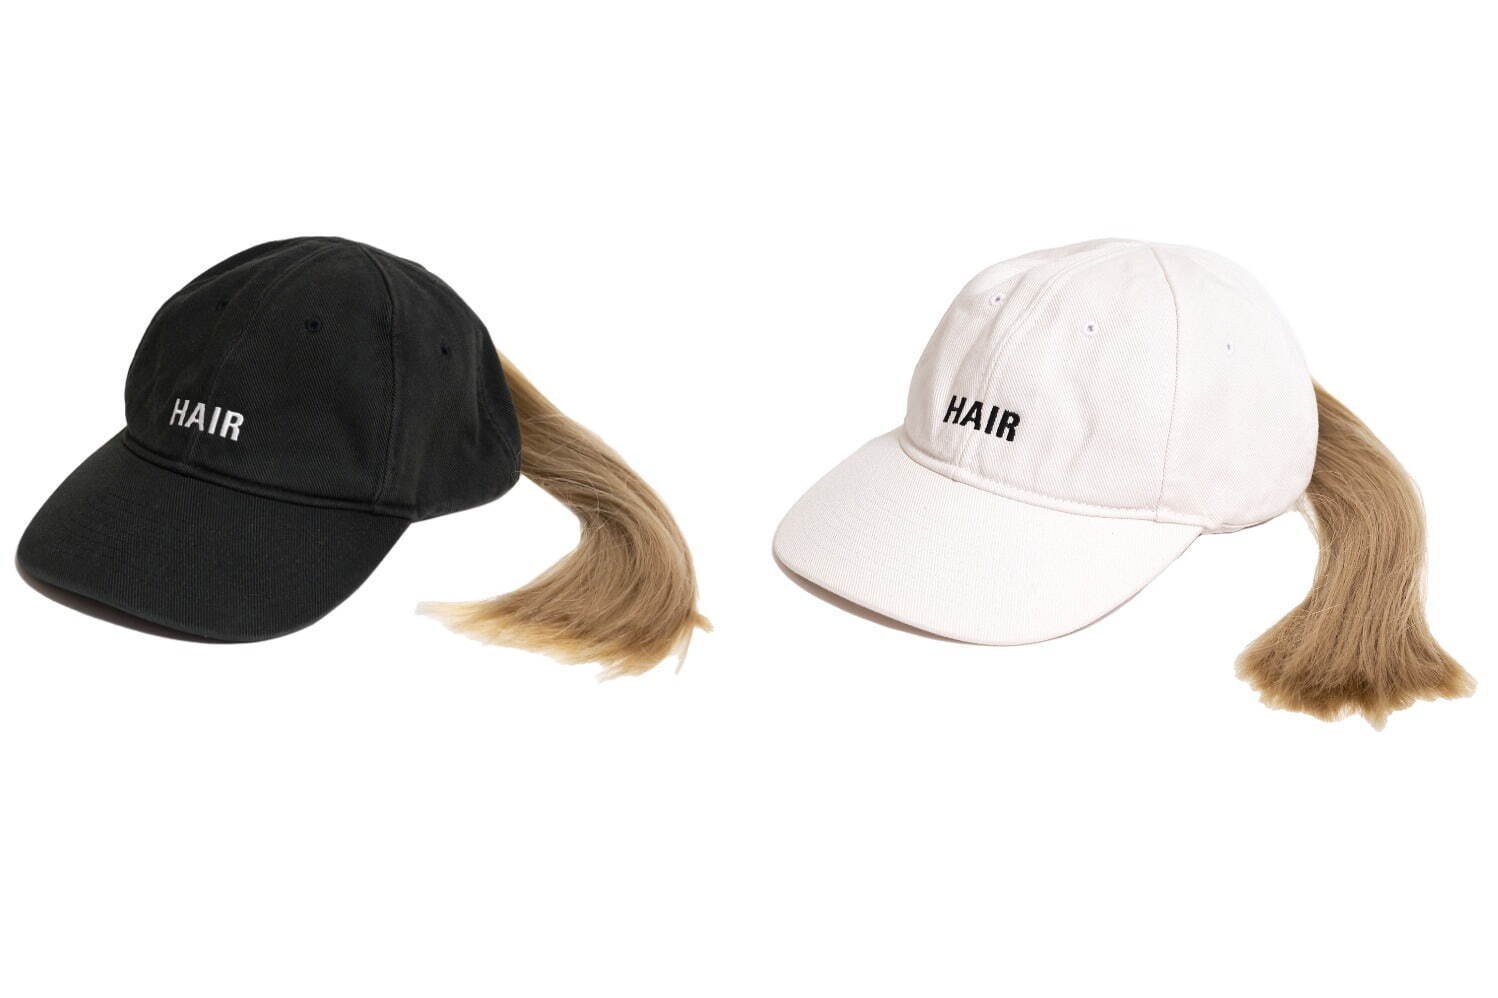 CAP WITH HAIR 各30,800円